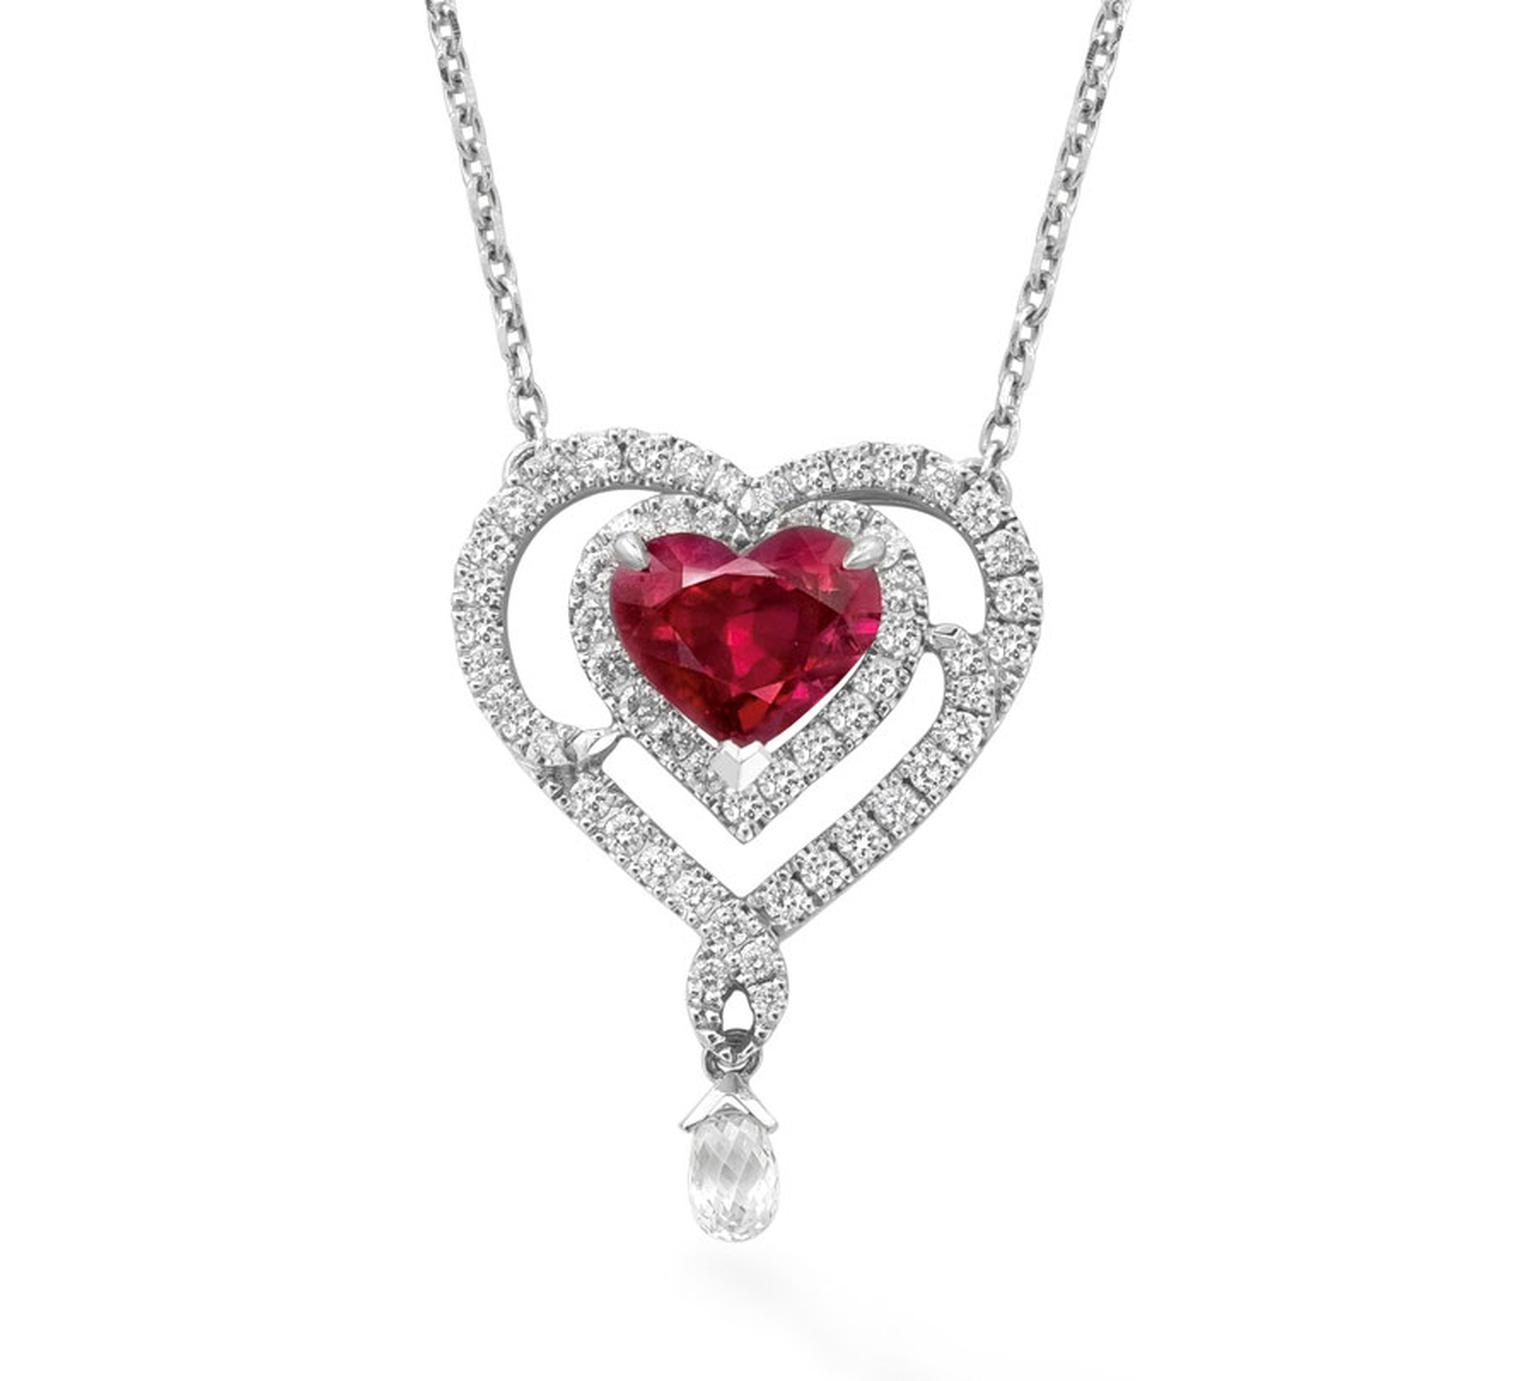 Boodles-pages78-79_4-VALENTINES.jpg